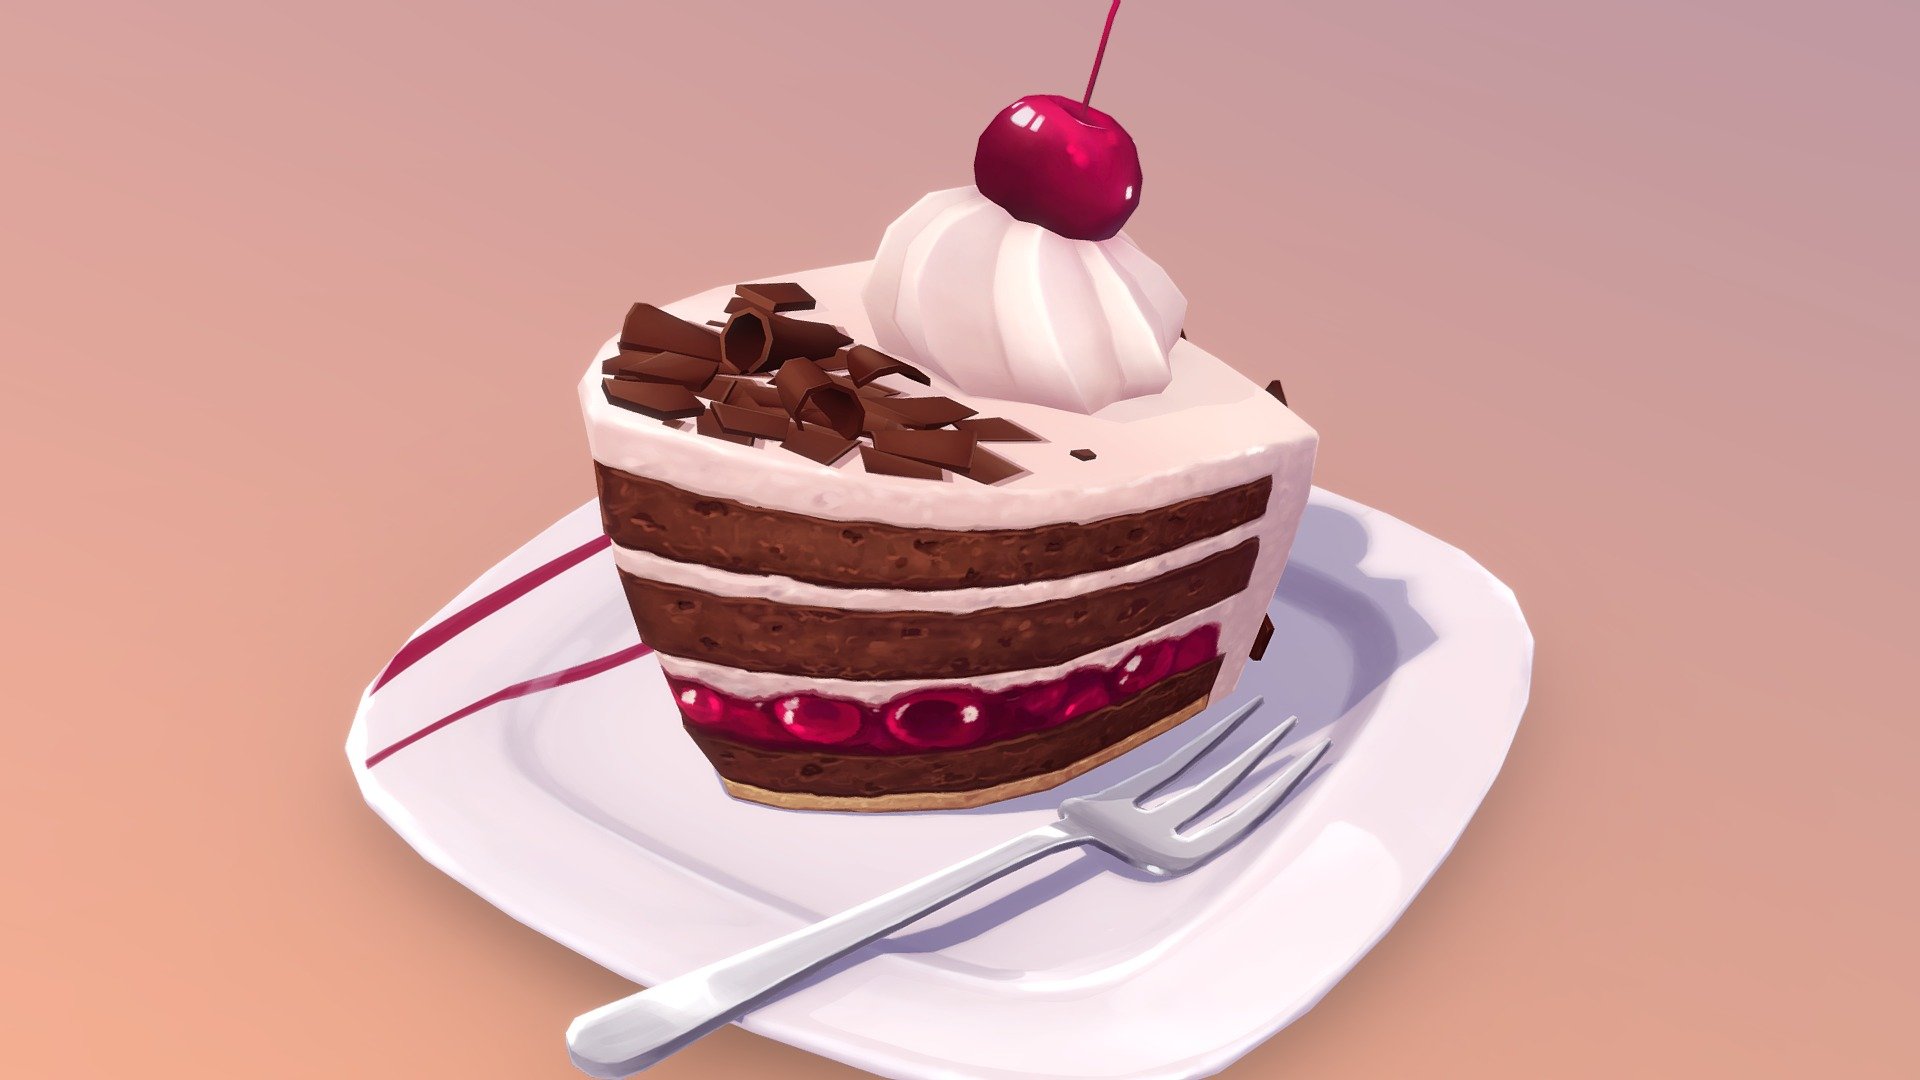 It's summertime and I decided to model my favorite dessert as weekend challenge.
Hope you guys like it! :D

 - Piece of Black Forest heaven! - 3D model by blueberry.stars (@dennys.verrino) 3d model